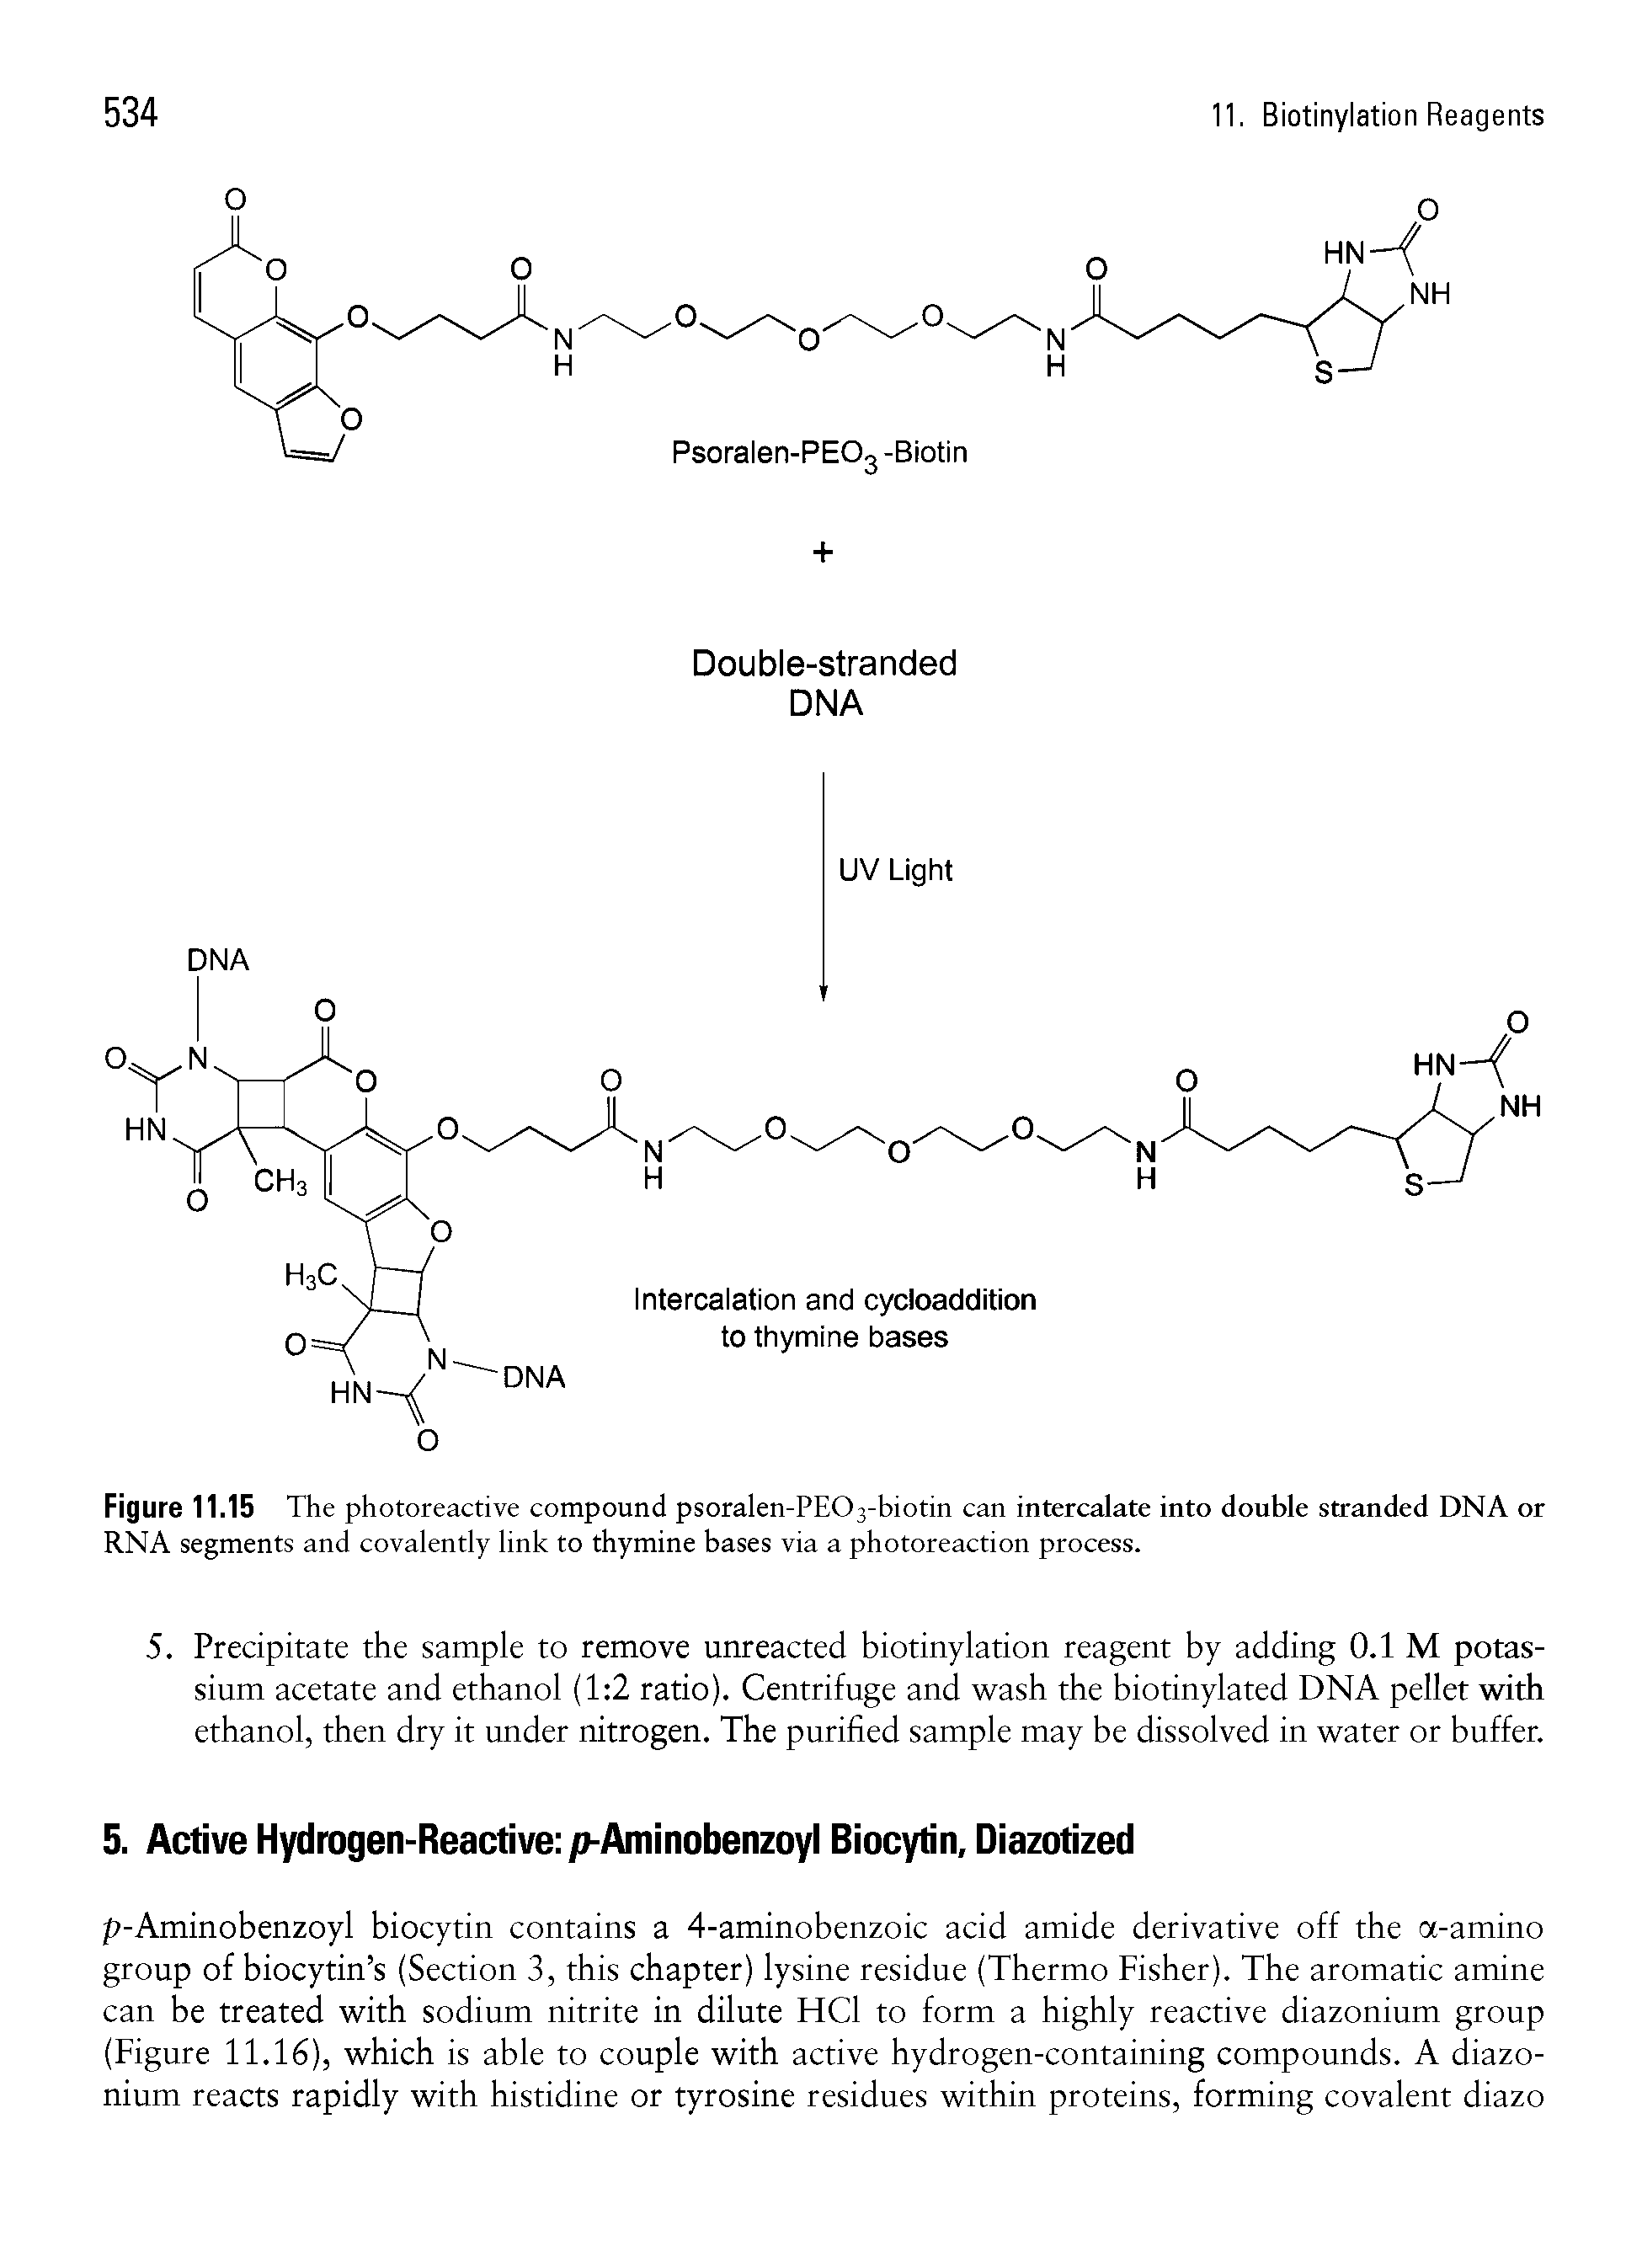 Figure 11.15 The photoreactive compound psoralen-PEC>3-biotin can intercalate into double stranded DNA or RNA segments and covalently link to thymine bases via a photoreaction process.